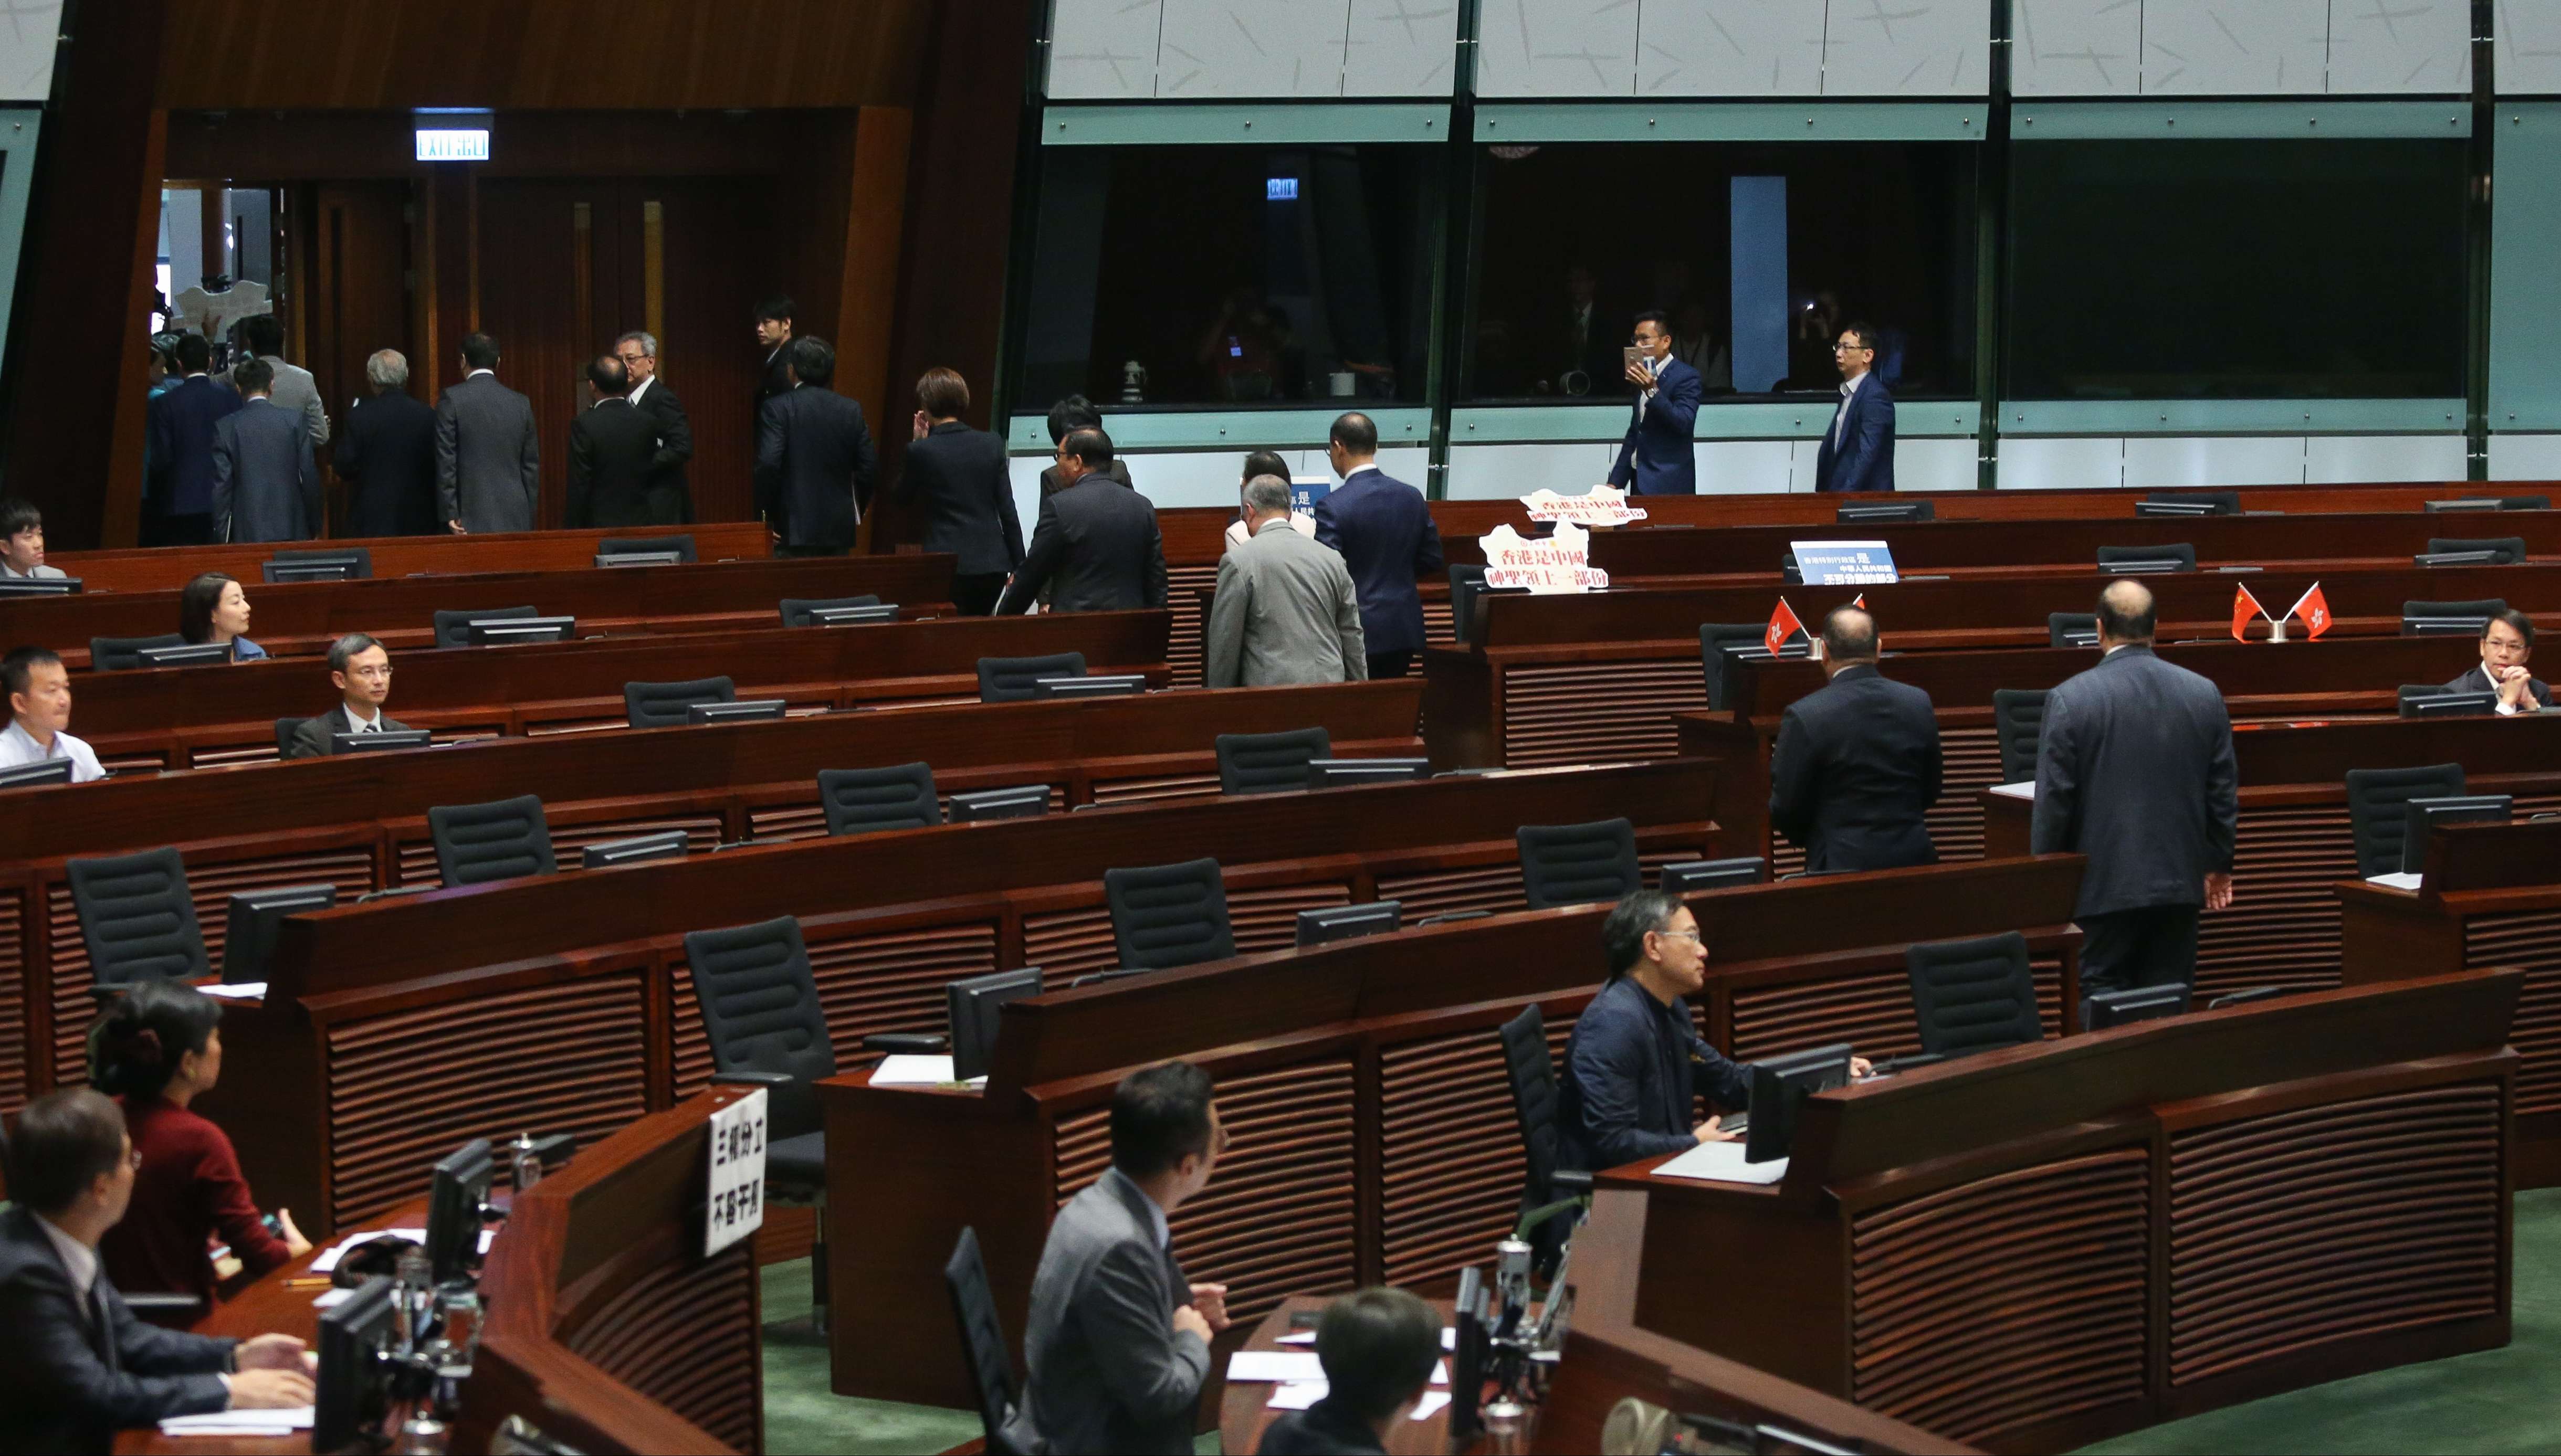 The pro-establishment camp walked out, forcing the meeting to be adjourned. Photo: Sam Tsang